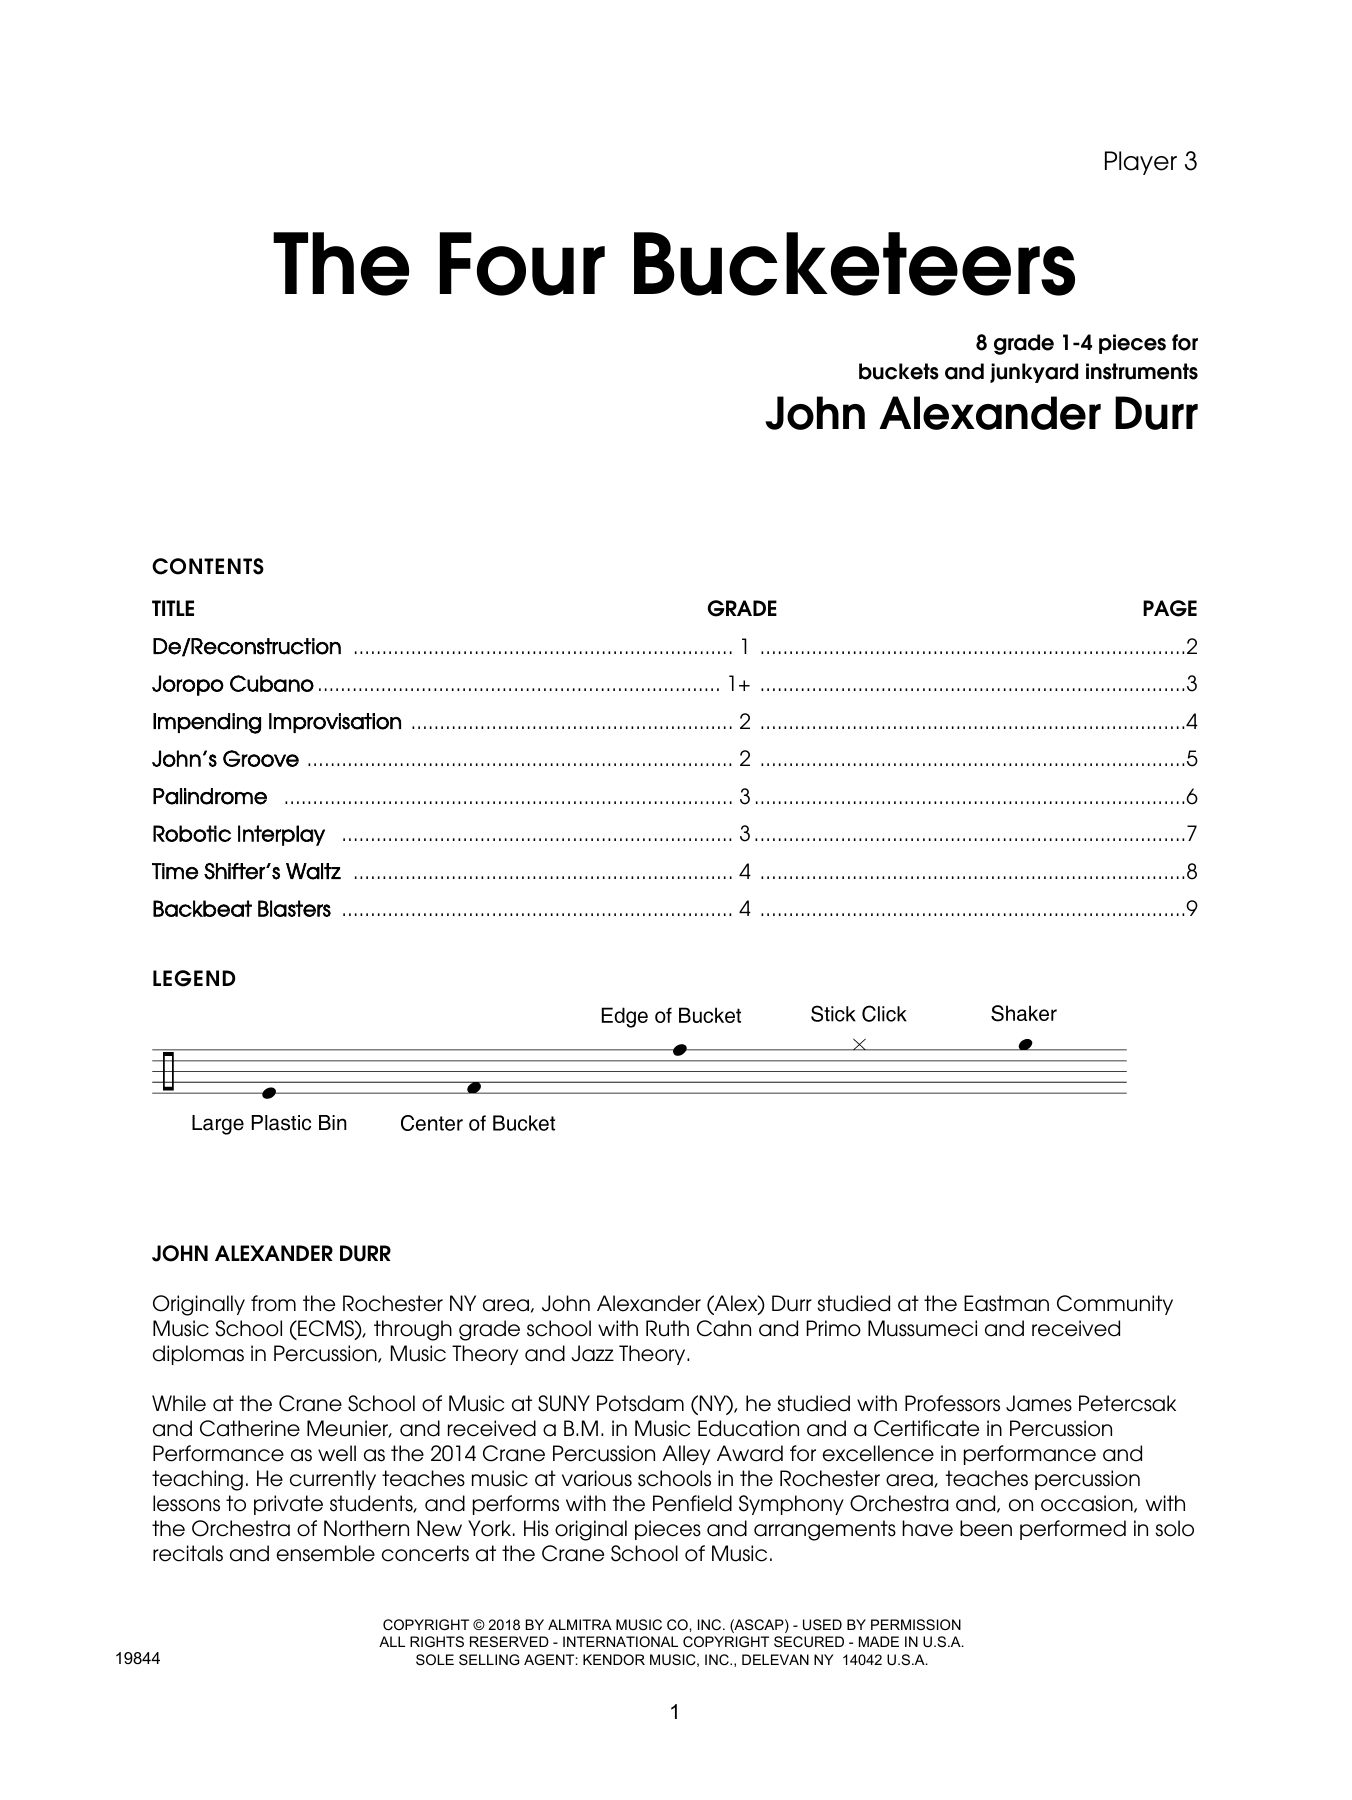 Download John Durr The Four Bucketeers - Percussion 3 Sheet Music